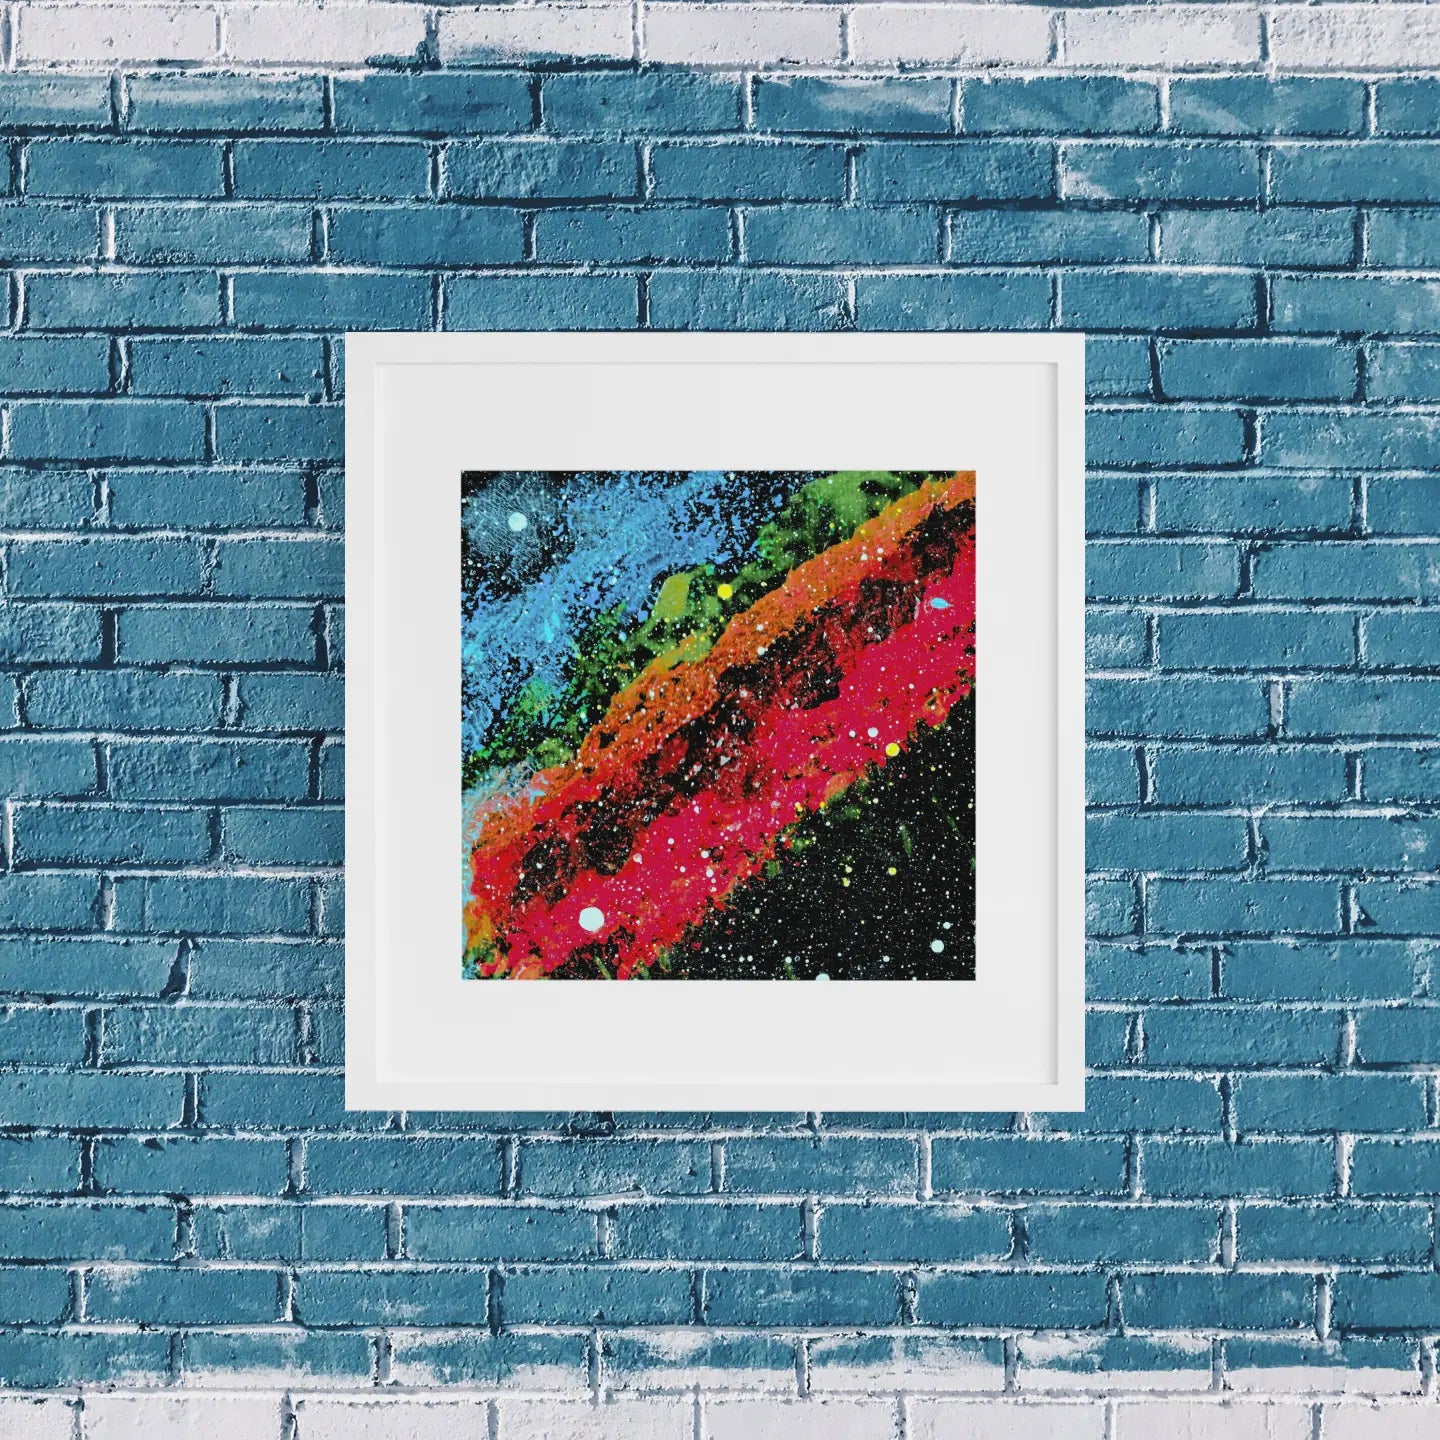 California Nebula in Perseus - NGC 1499 - 8x8 Art Print in a white frame on a brick wall